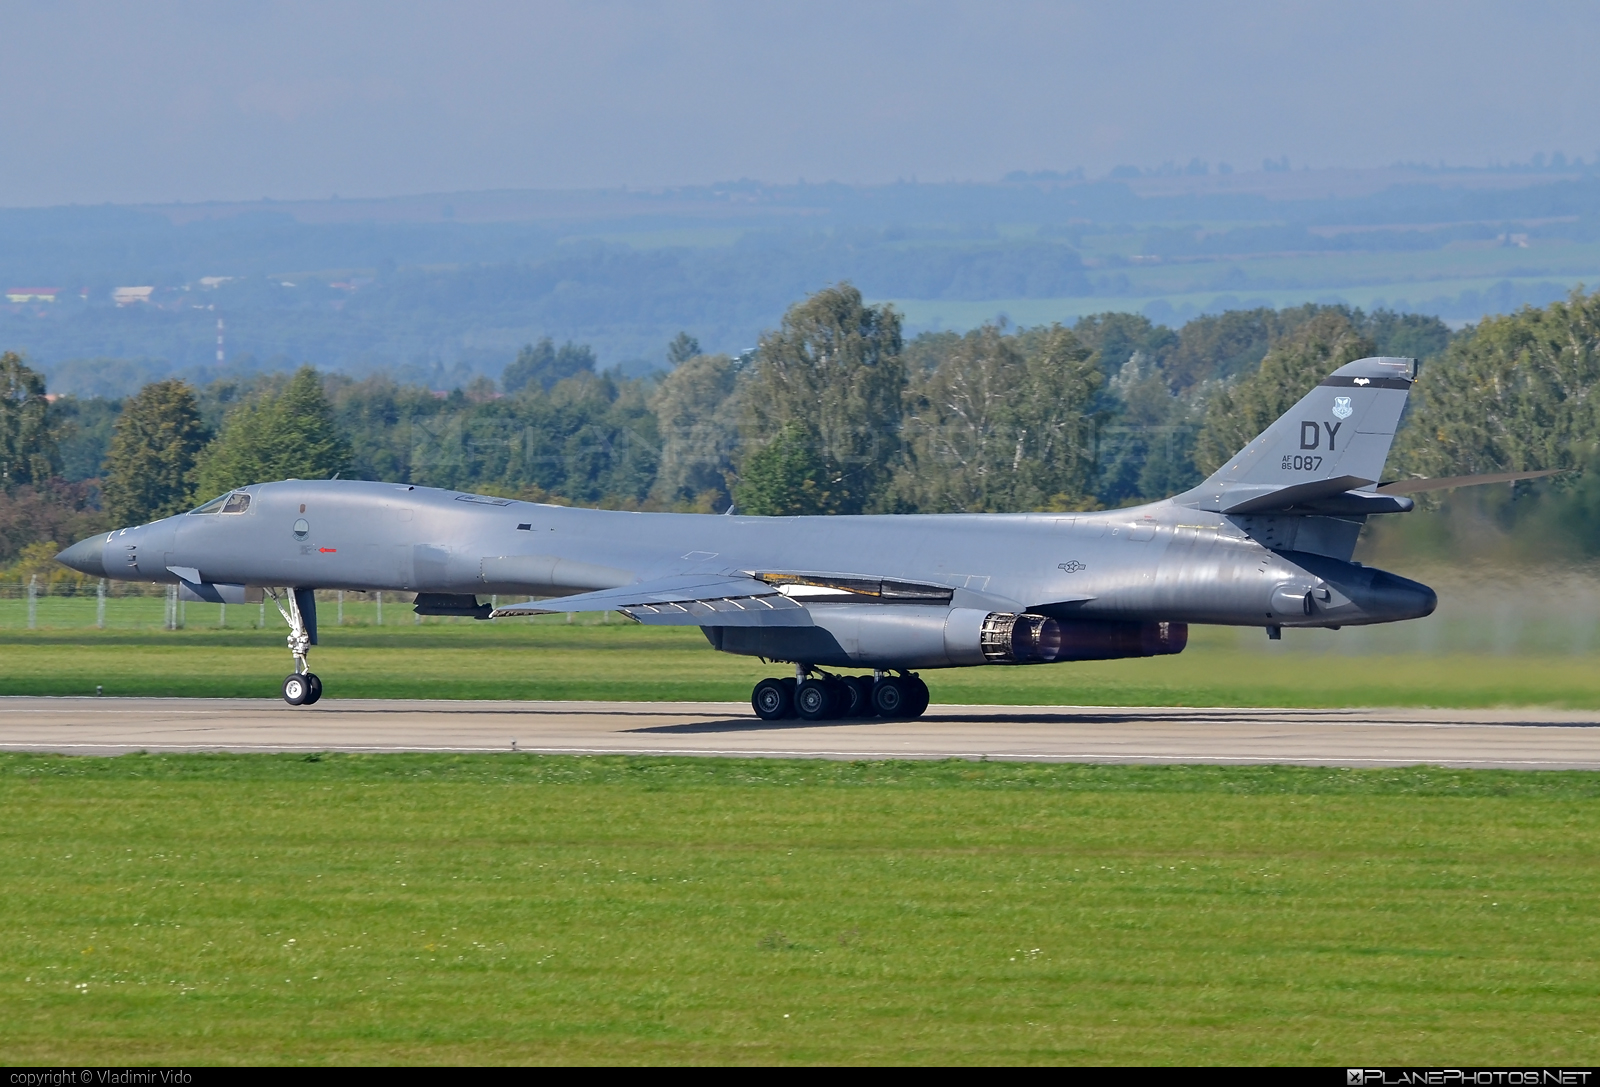 Rockwell B-1B Lancer - 85-0087 operated by US Air Force (USAF) #b1 #b1bLancer #natodays #natodays2017 #rockwell #rockwellb1 #rockwellb1b #rockwellb1blancer #rockwellb1lancer #usaf #usairforce